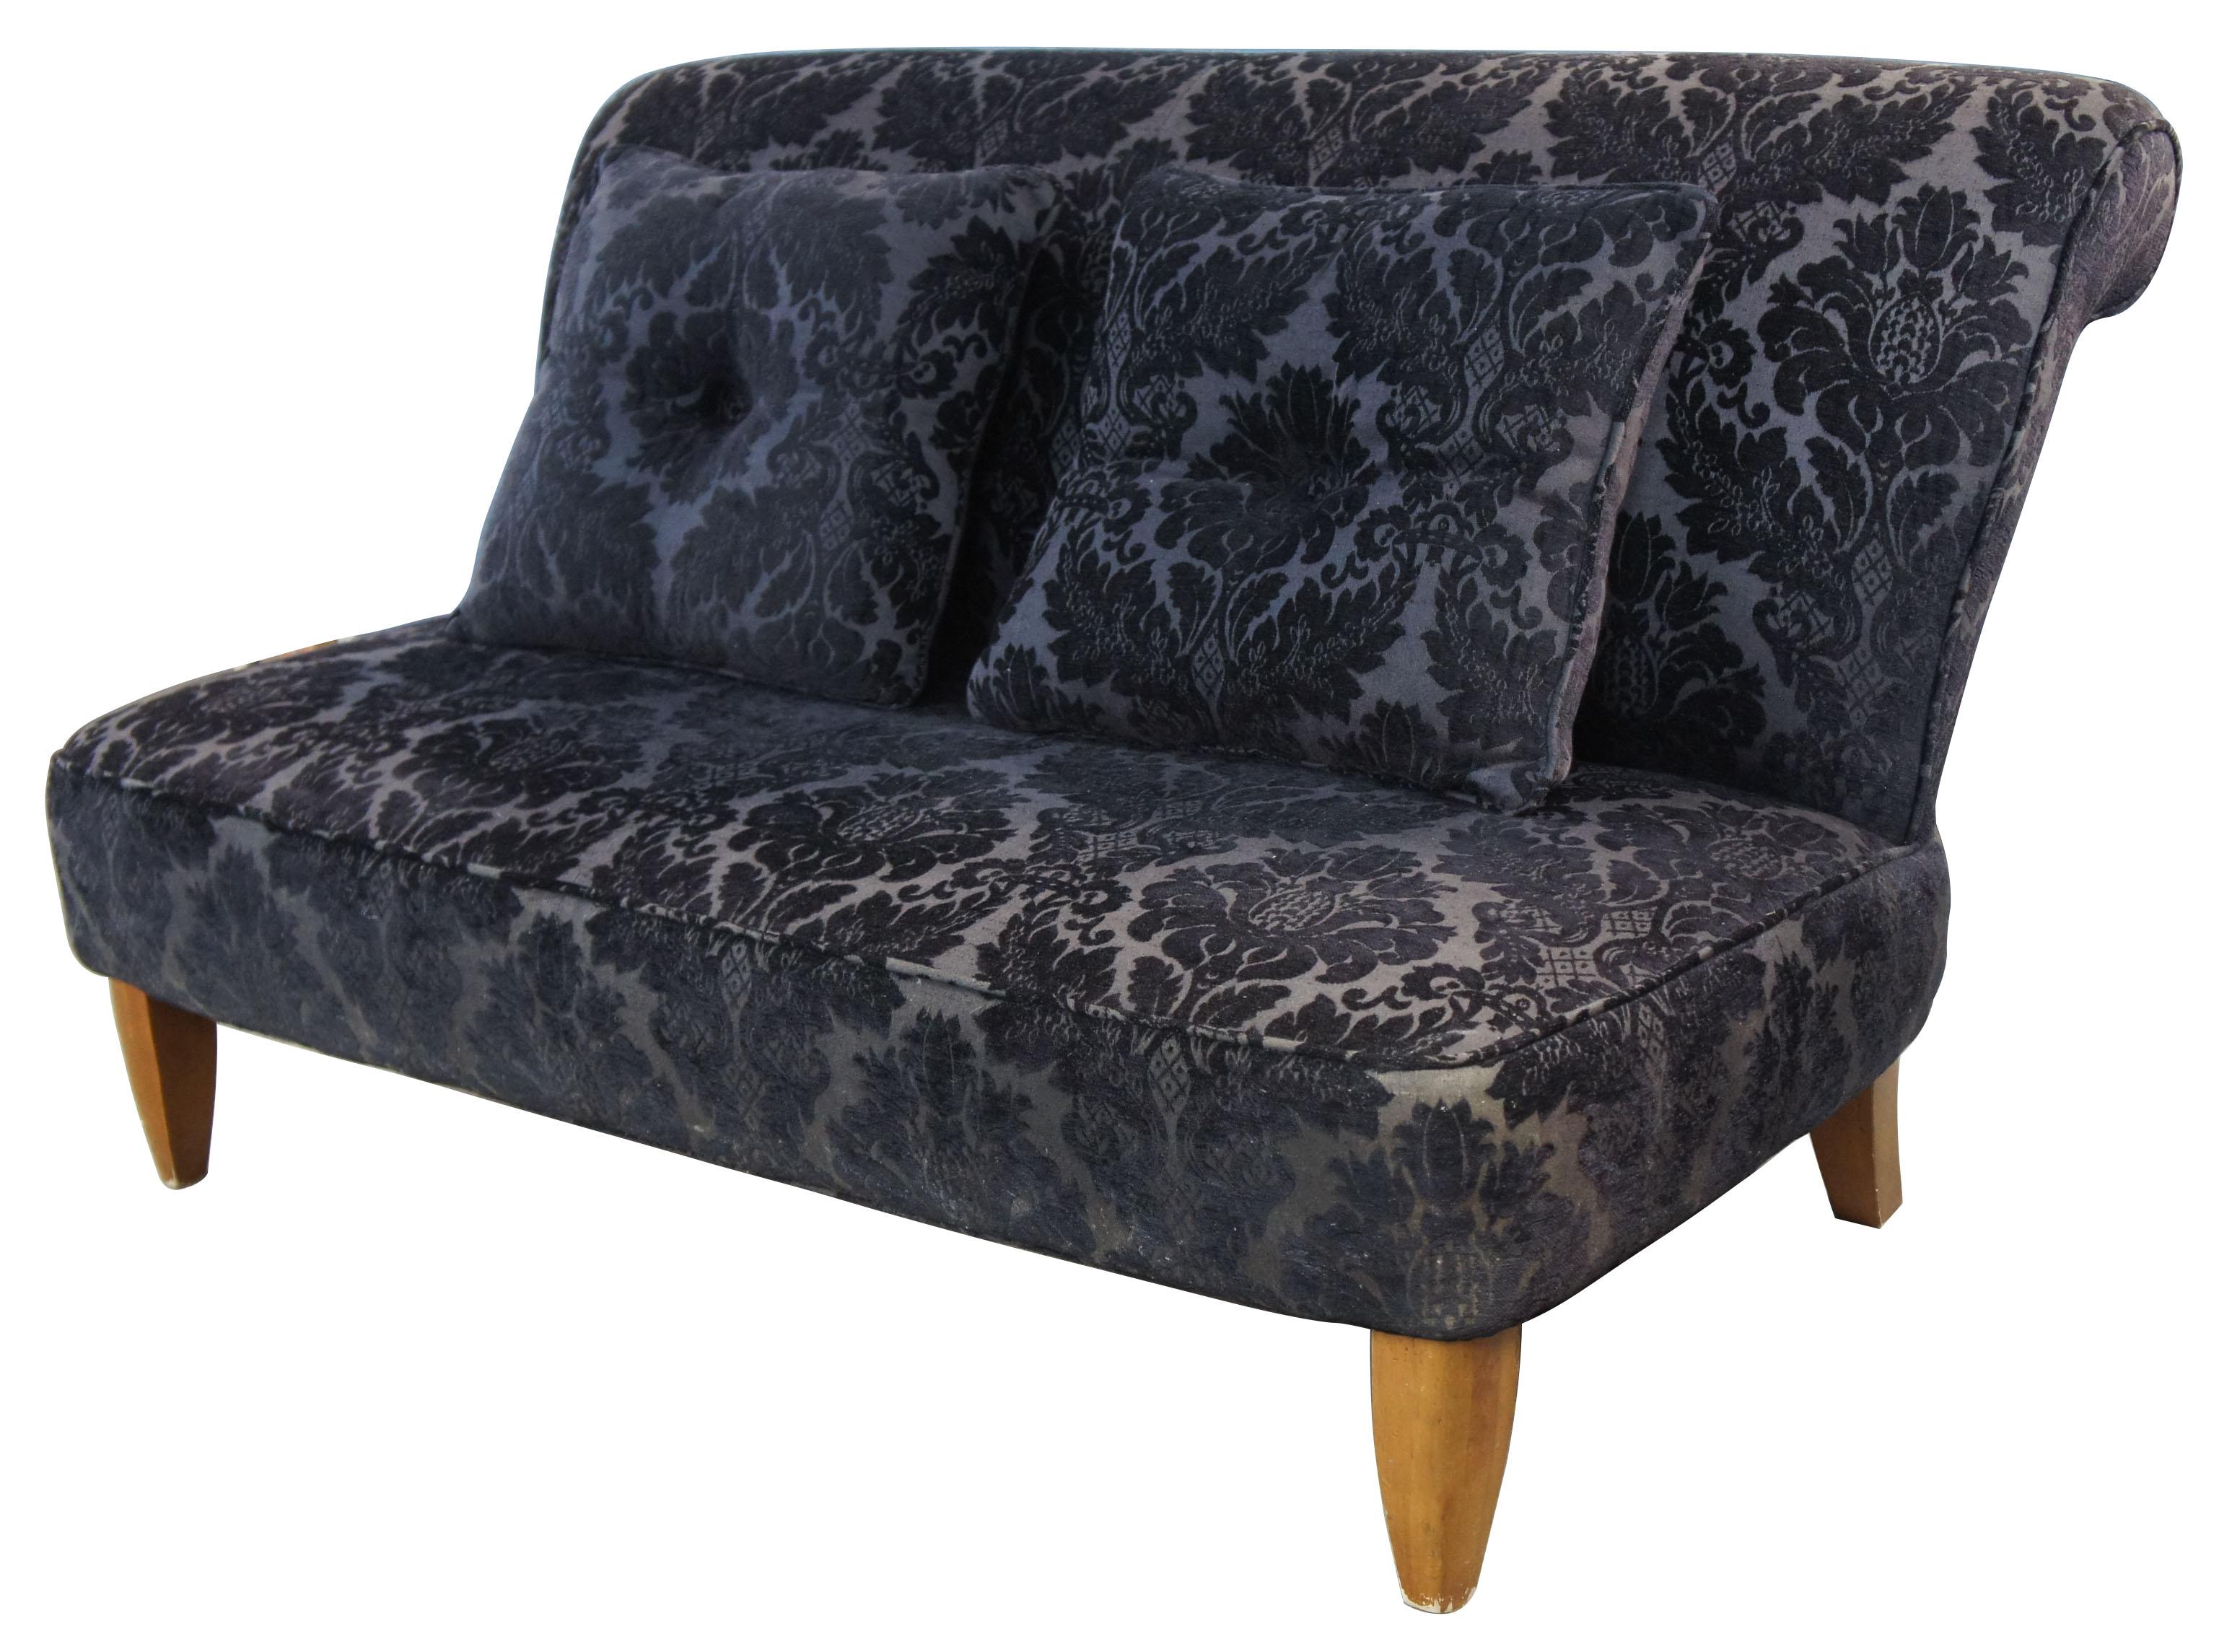 Century Furniture signature settee French inspired black flocked loveseat Elkins

Beautifully upholstered in a flocked floral fabric. This settee was the signature model before the current Elkins Tufted Settee 44-1005.